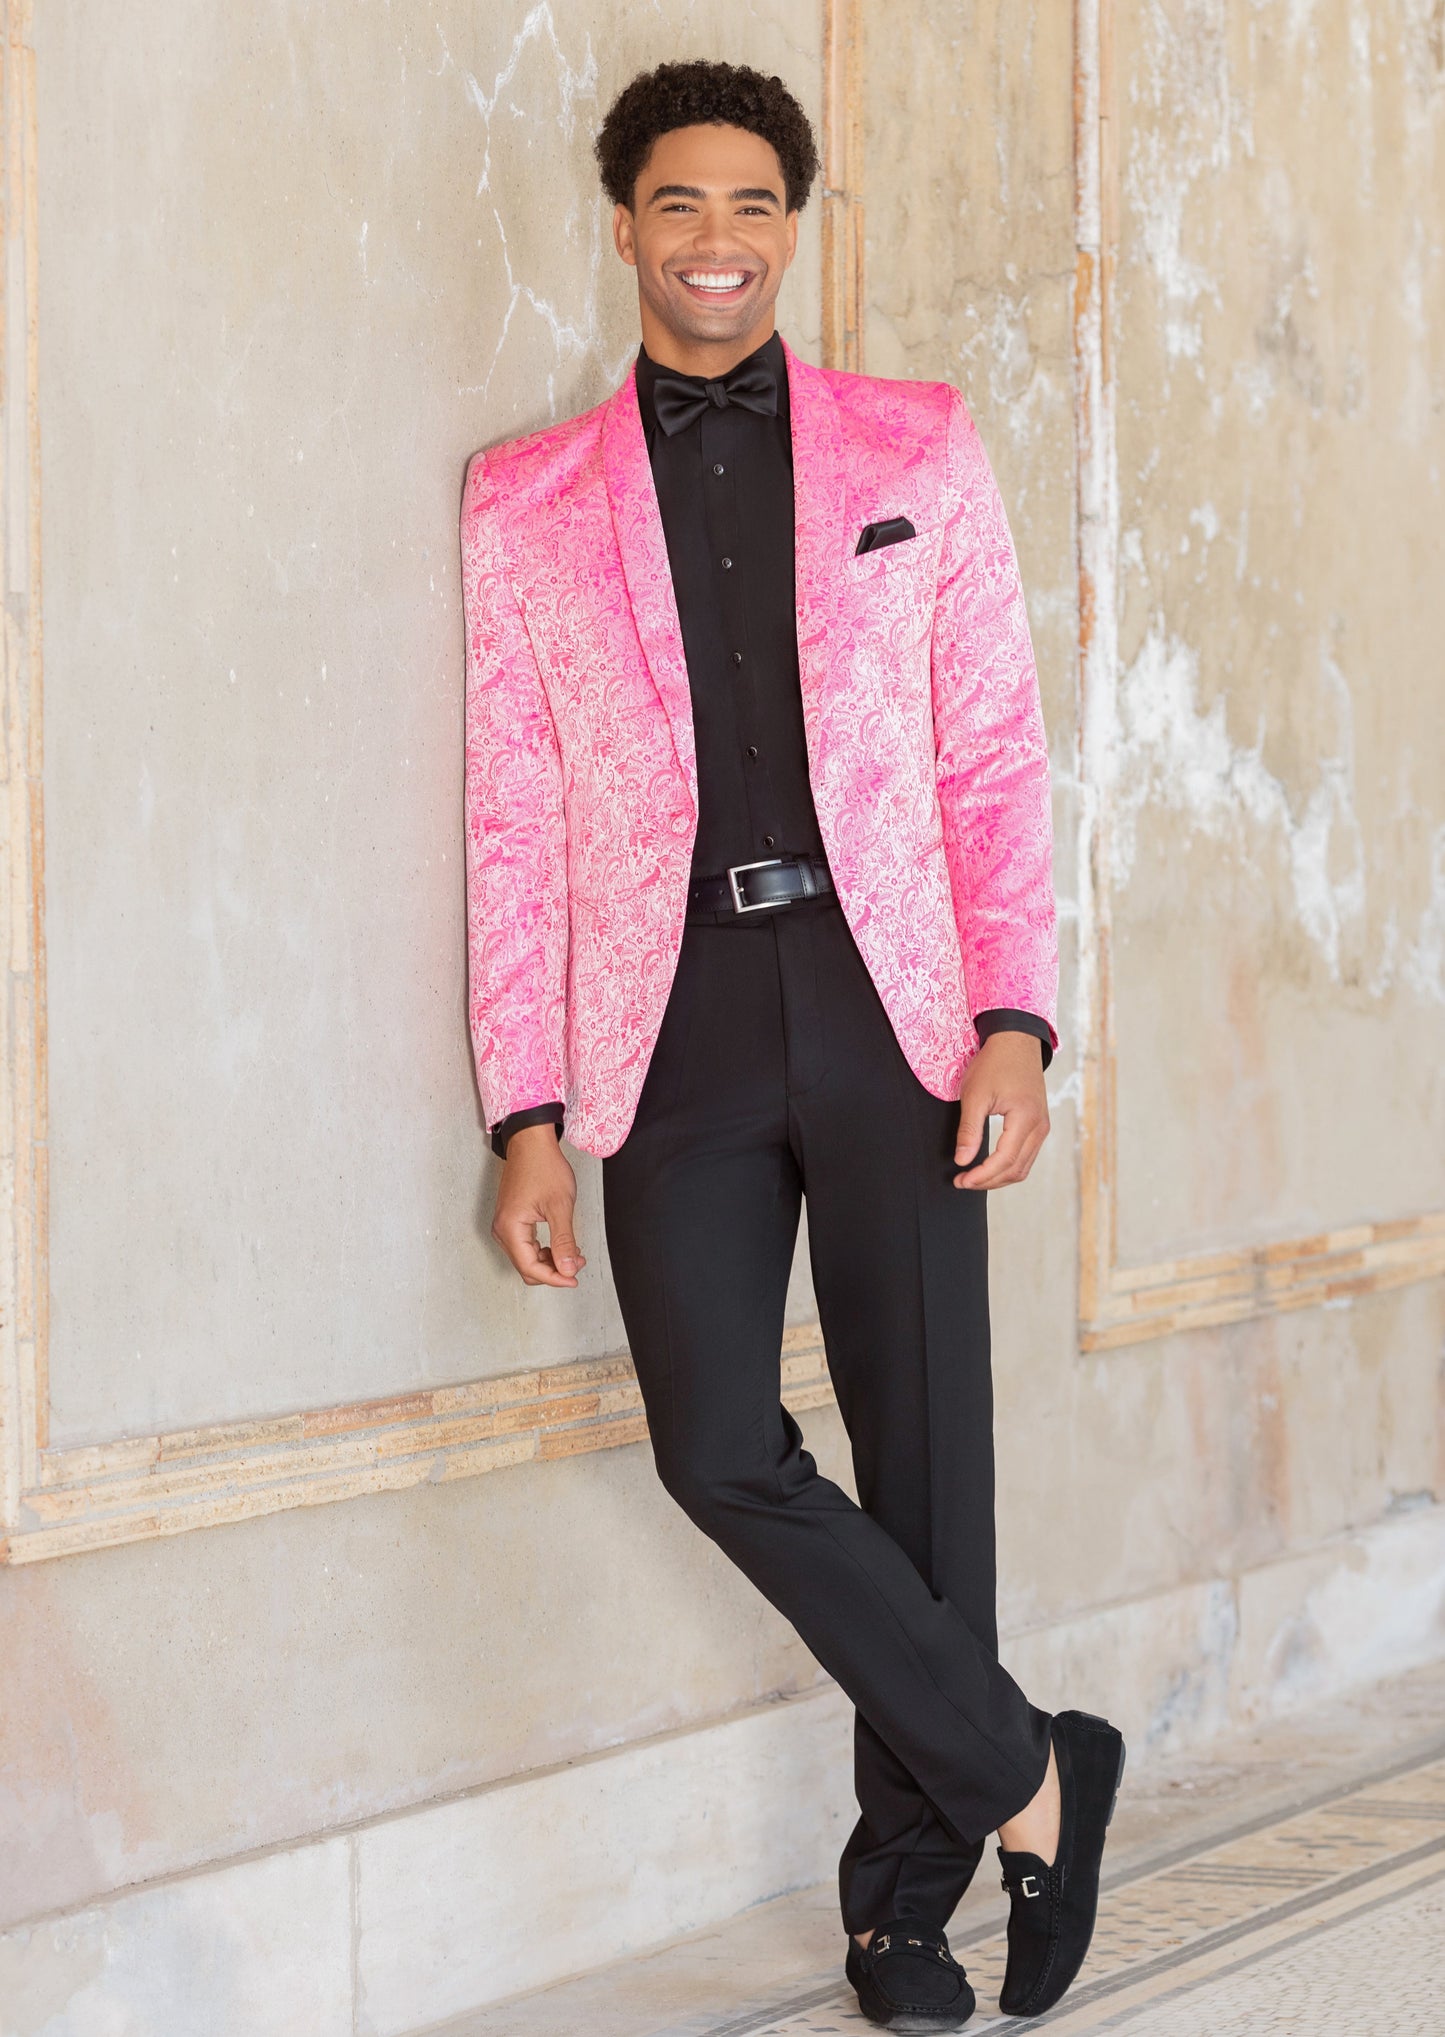 Aries Paisley in Hot Pink by Mark of Distinction